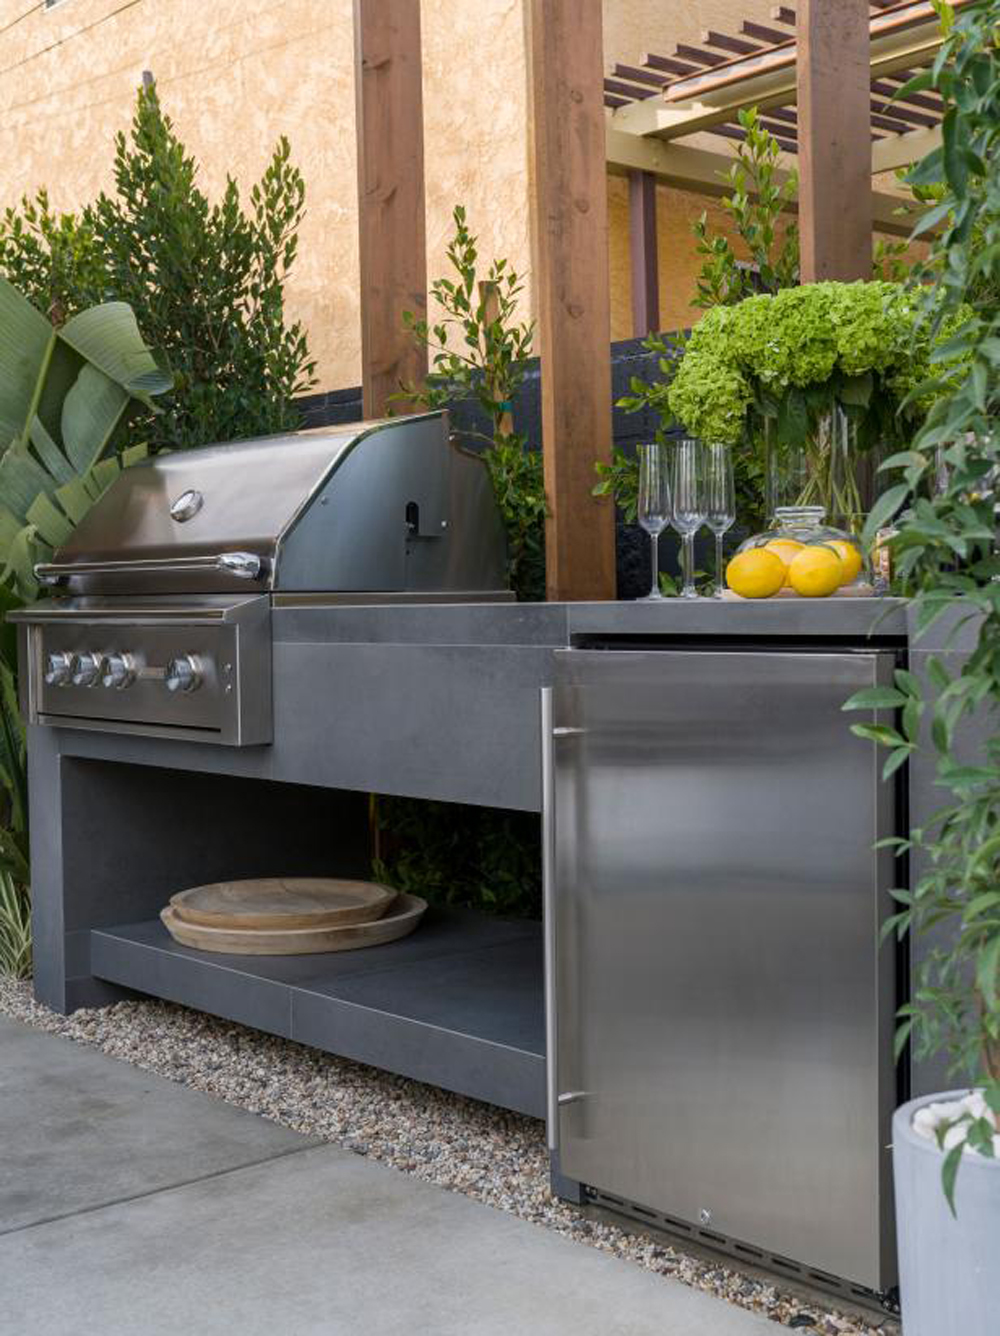 An outdoor modular kitchen with a stunning custom finish and barbecue